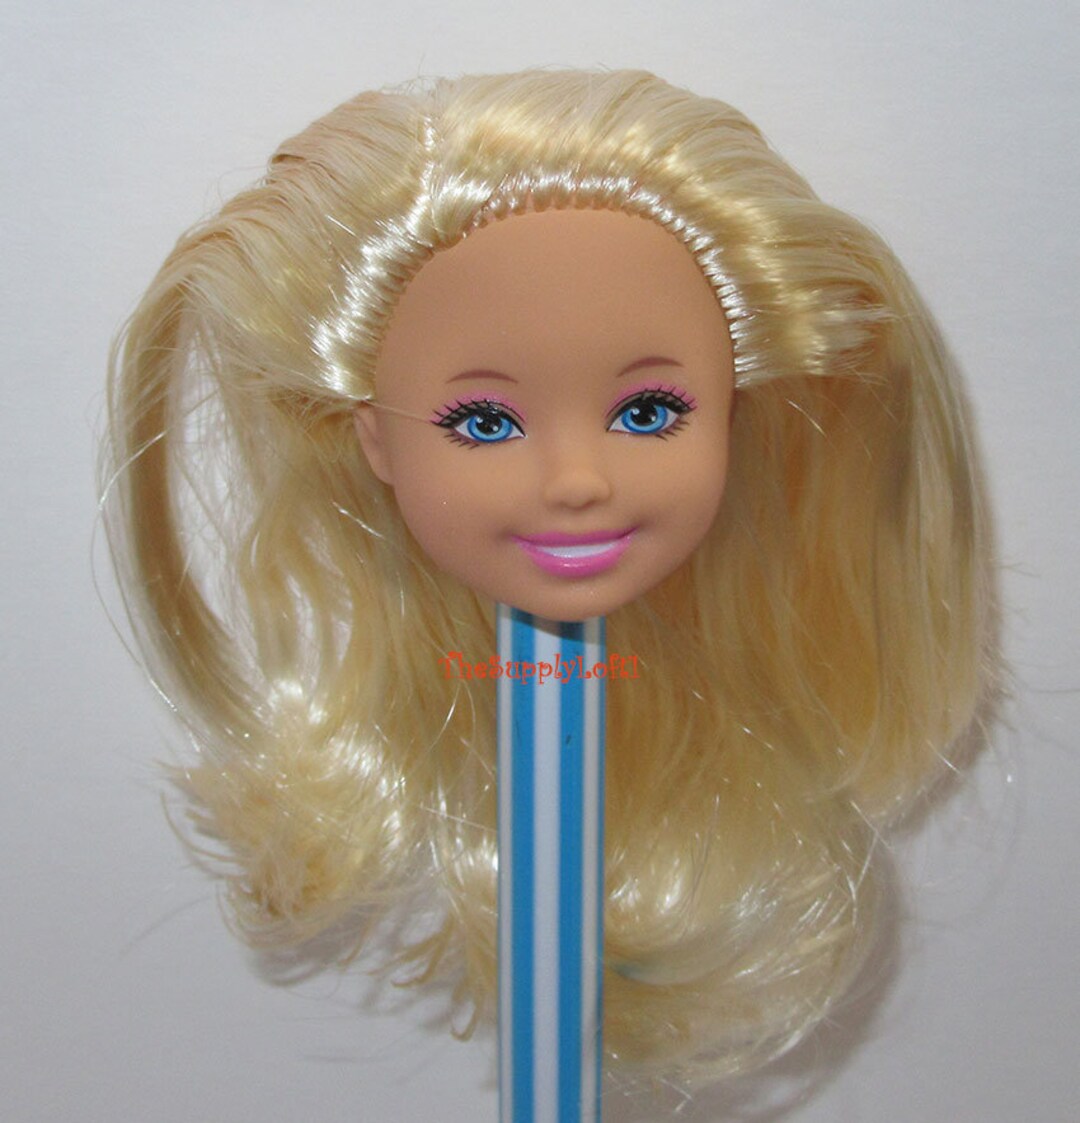 New in a Pony Tale Chelsea Doll Head Barbie Sister for